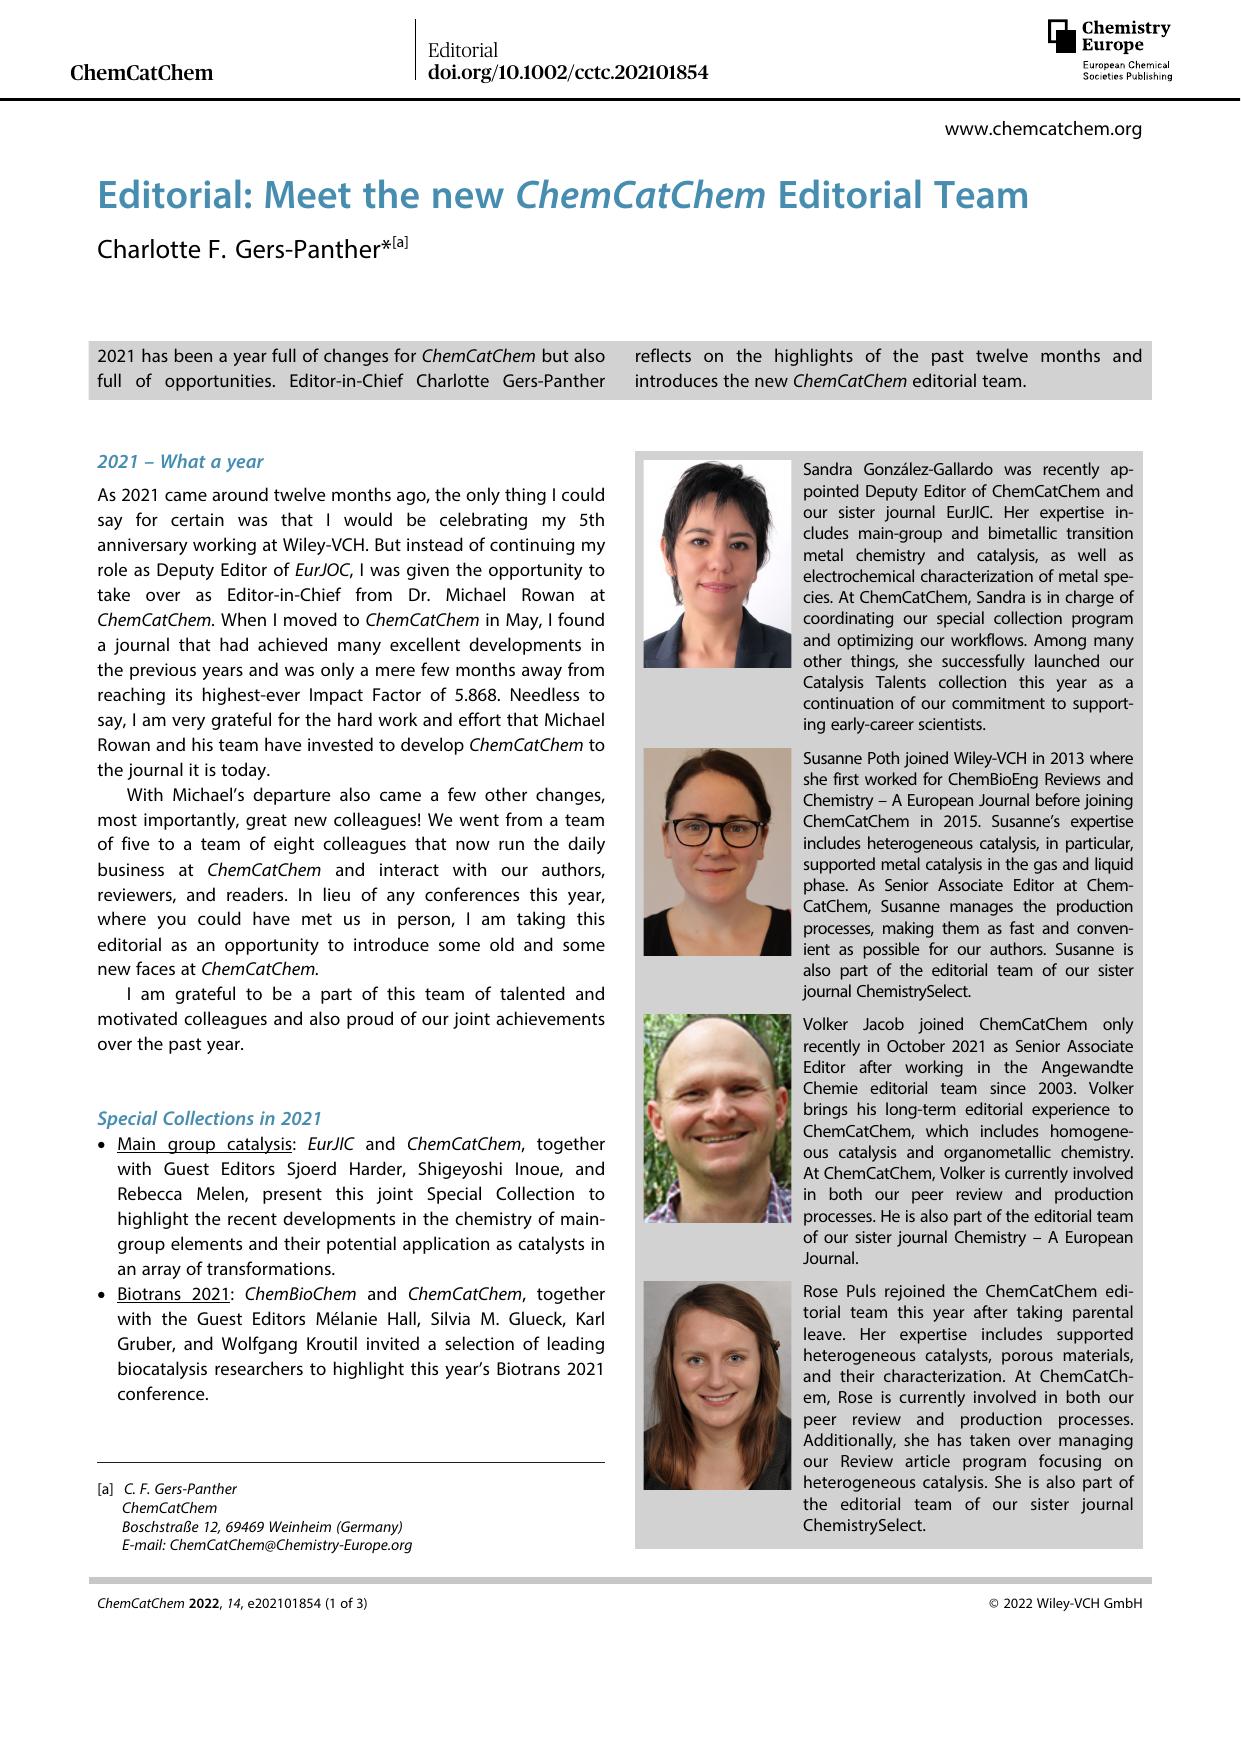 Editorial: Meet the new ChemCatChem Editorial Team by Unknown